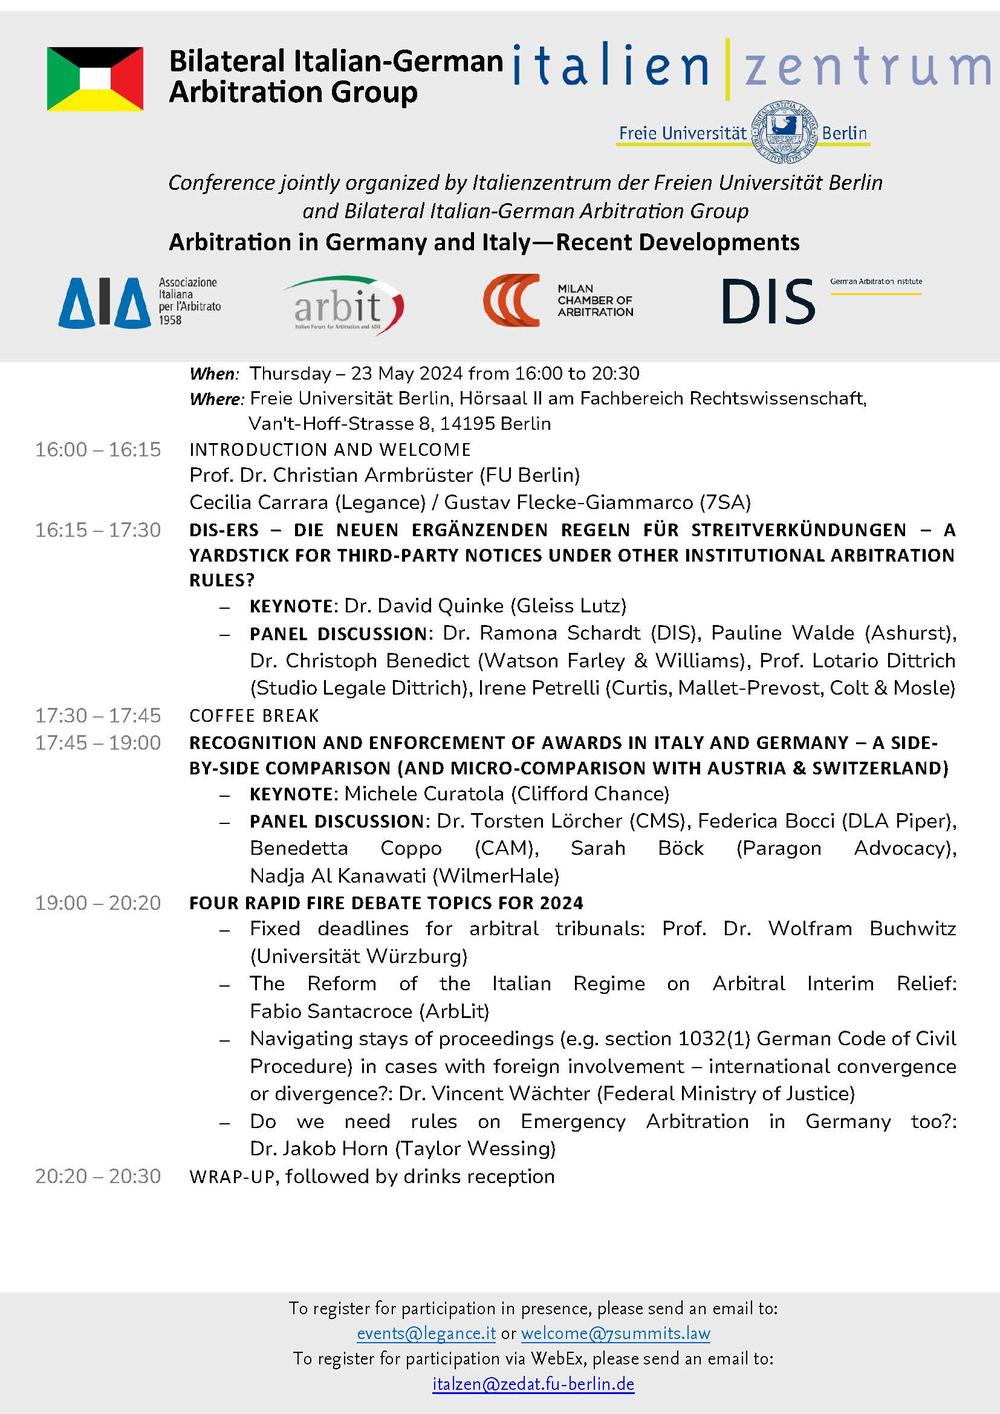 Conference Arbitration in Germany and Italy - Recent Developments